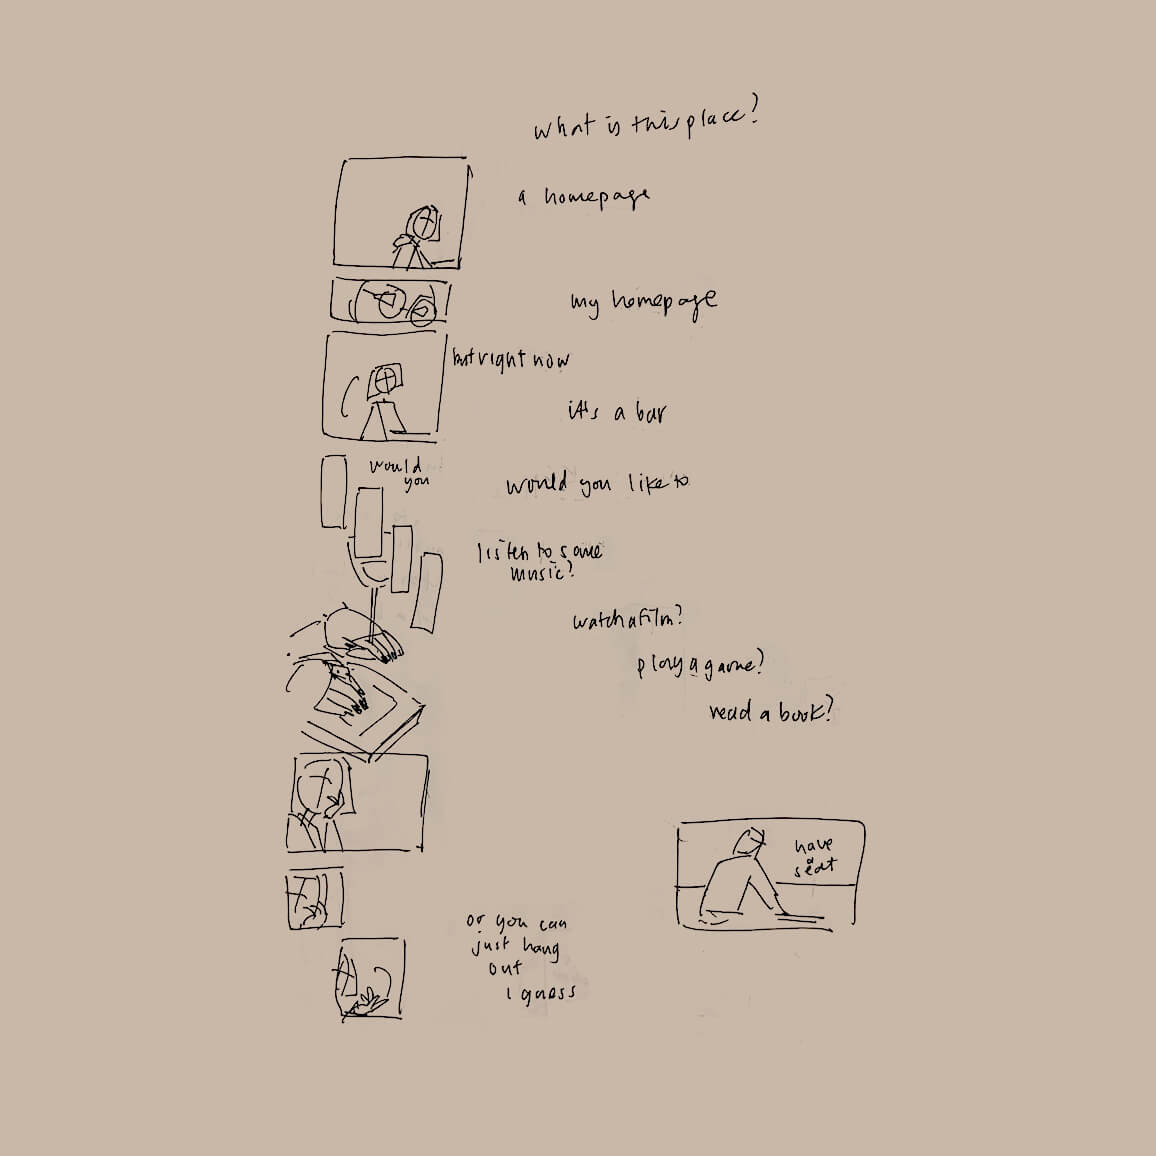 Sketch showing a bunch of thumbnails, and then dialogue next to them.